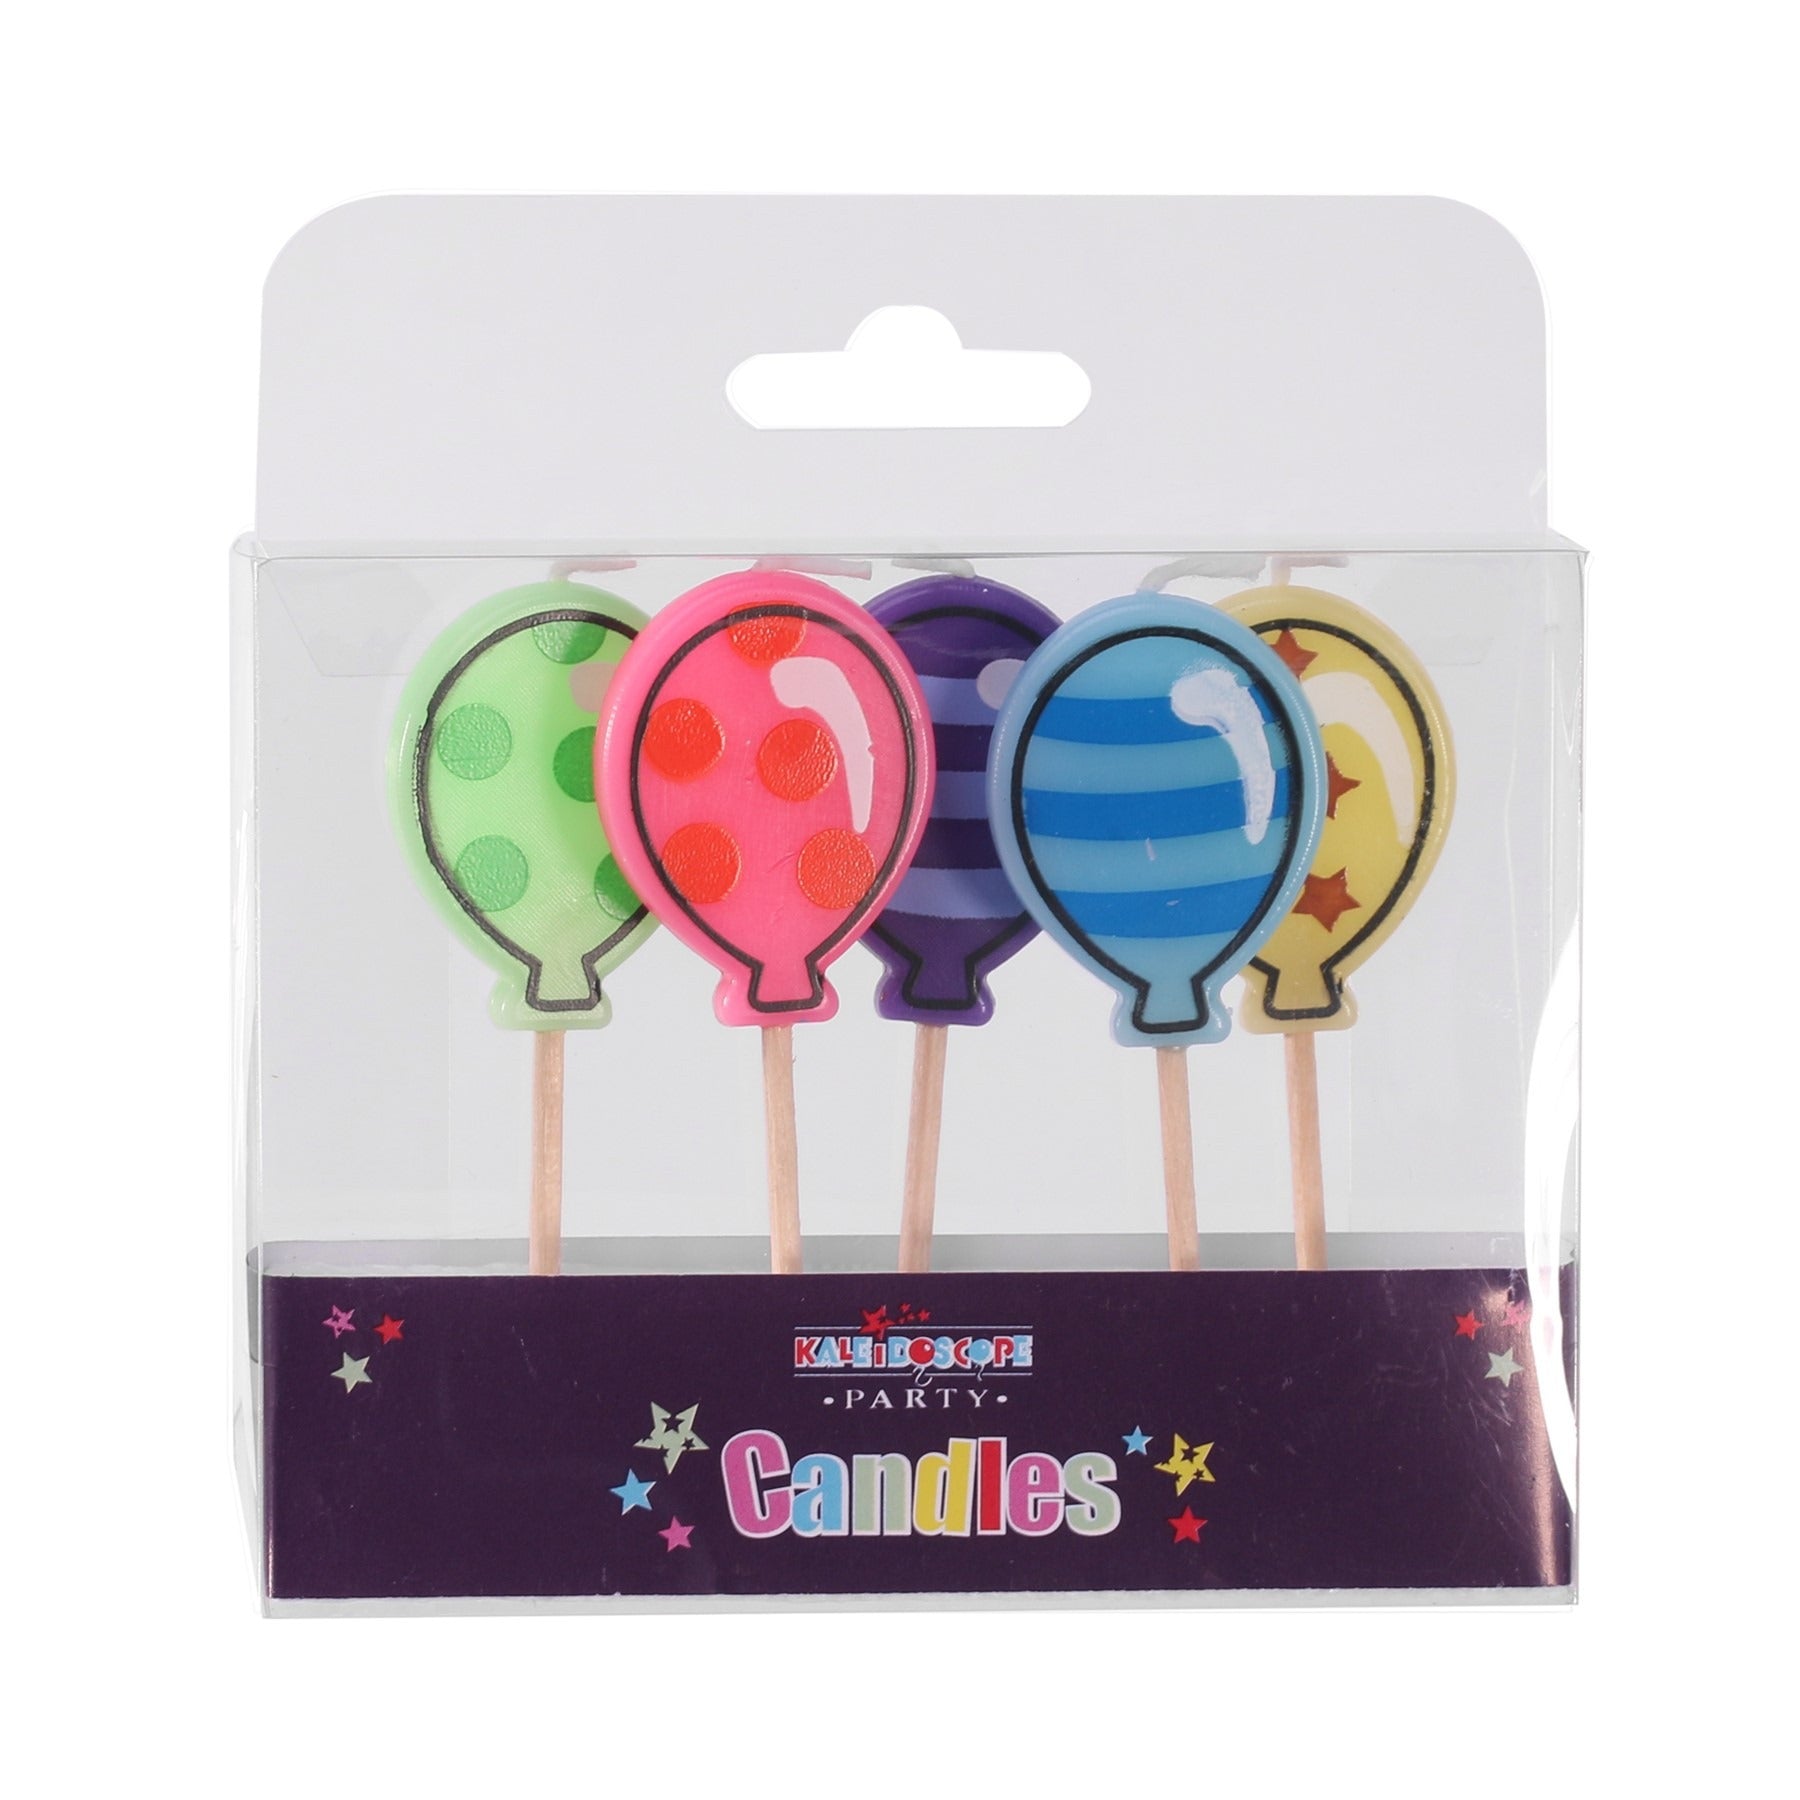 View Balloon Shaped Candles Pack of 6 information